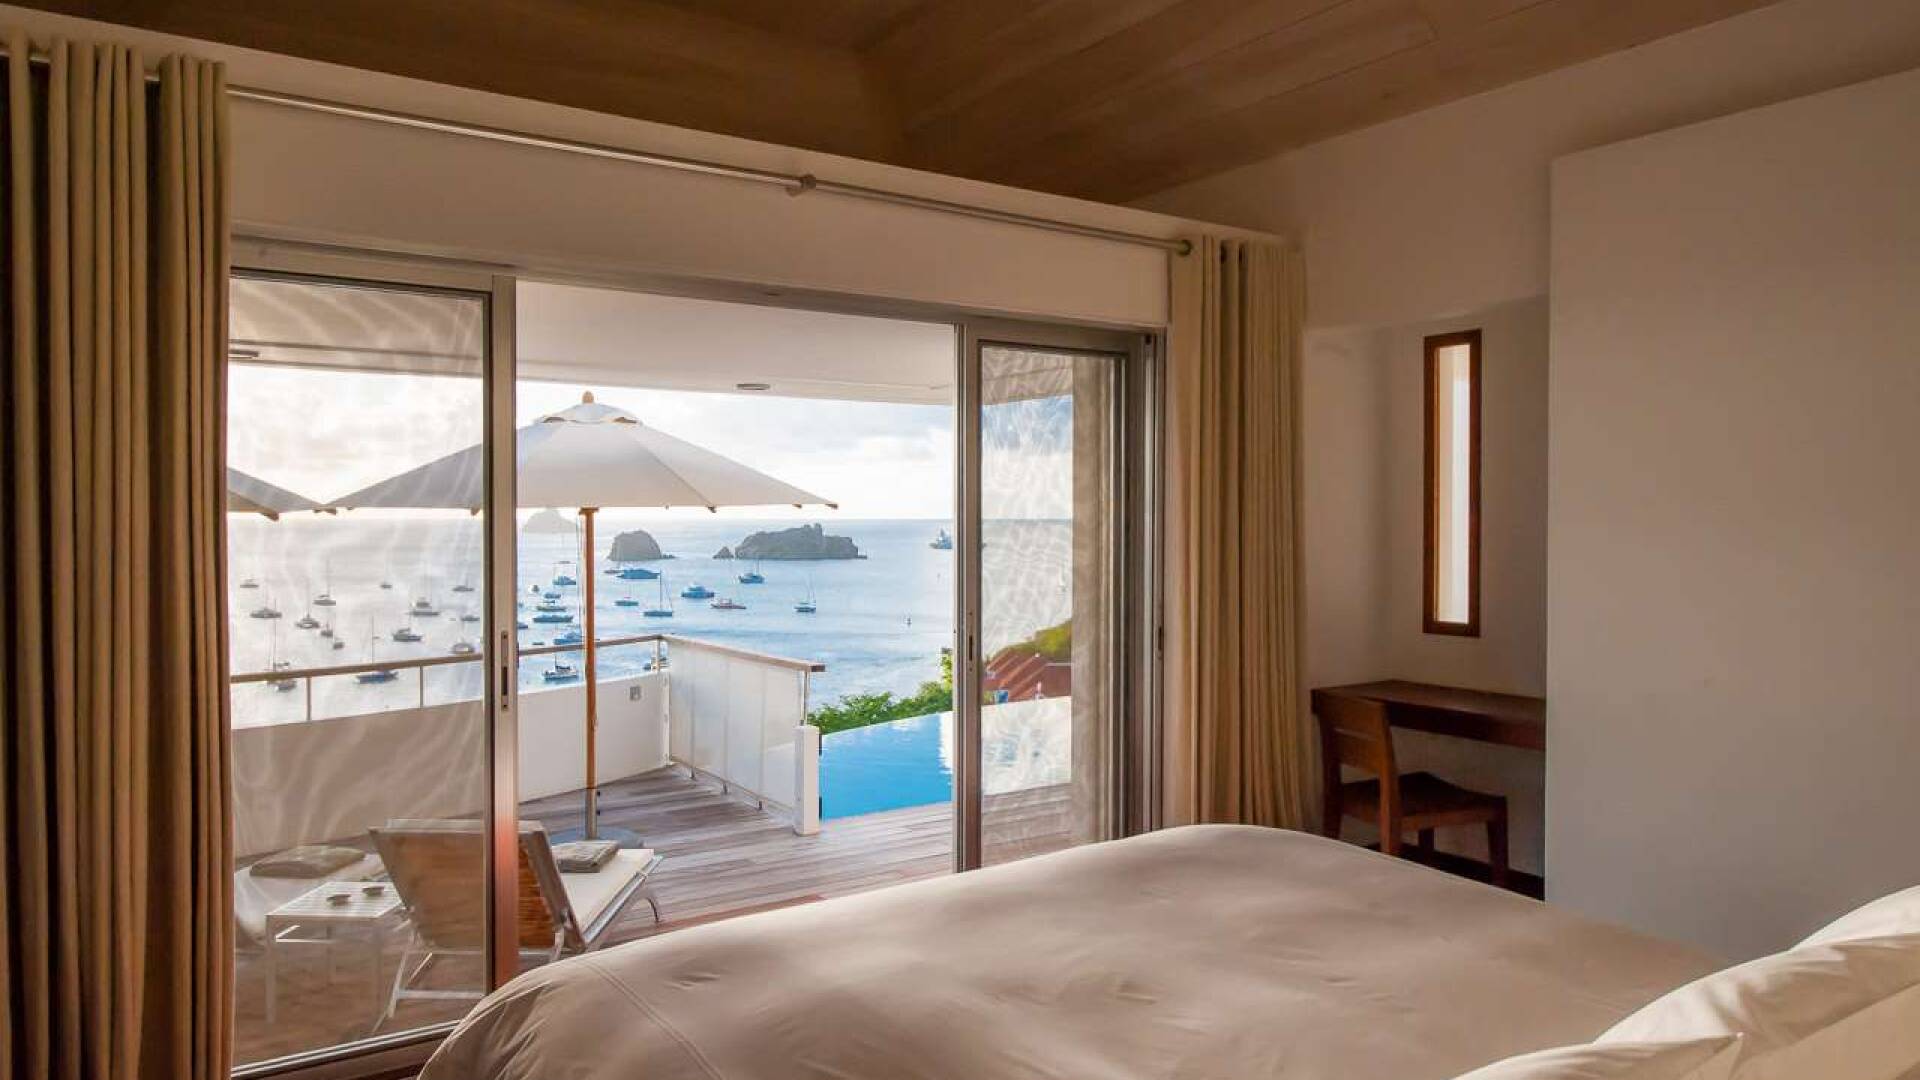 Bedroom at WV LAM, Gustavia, St. Barthelemy